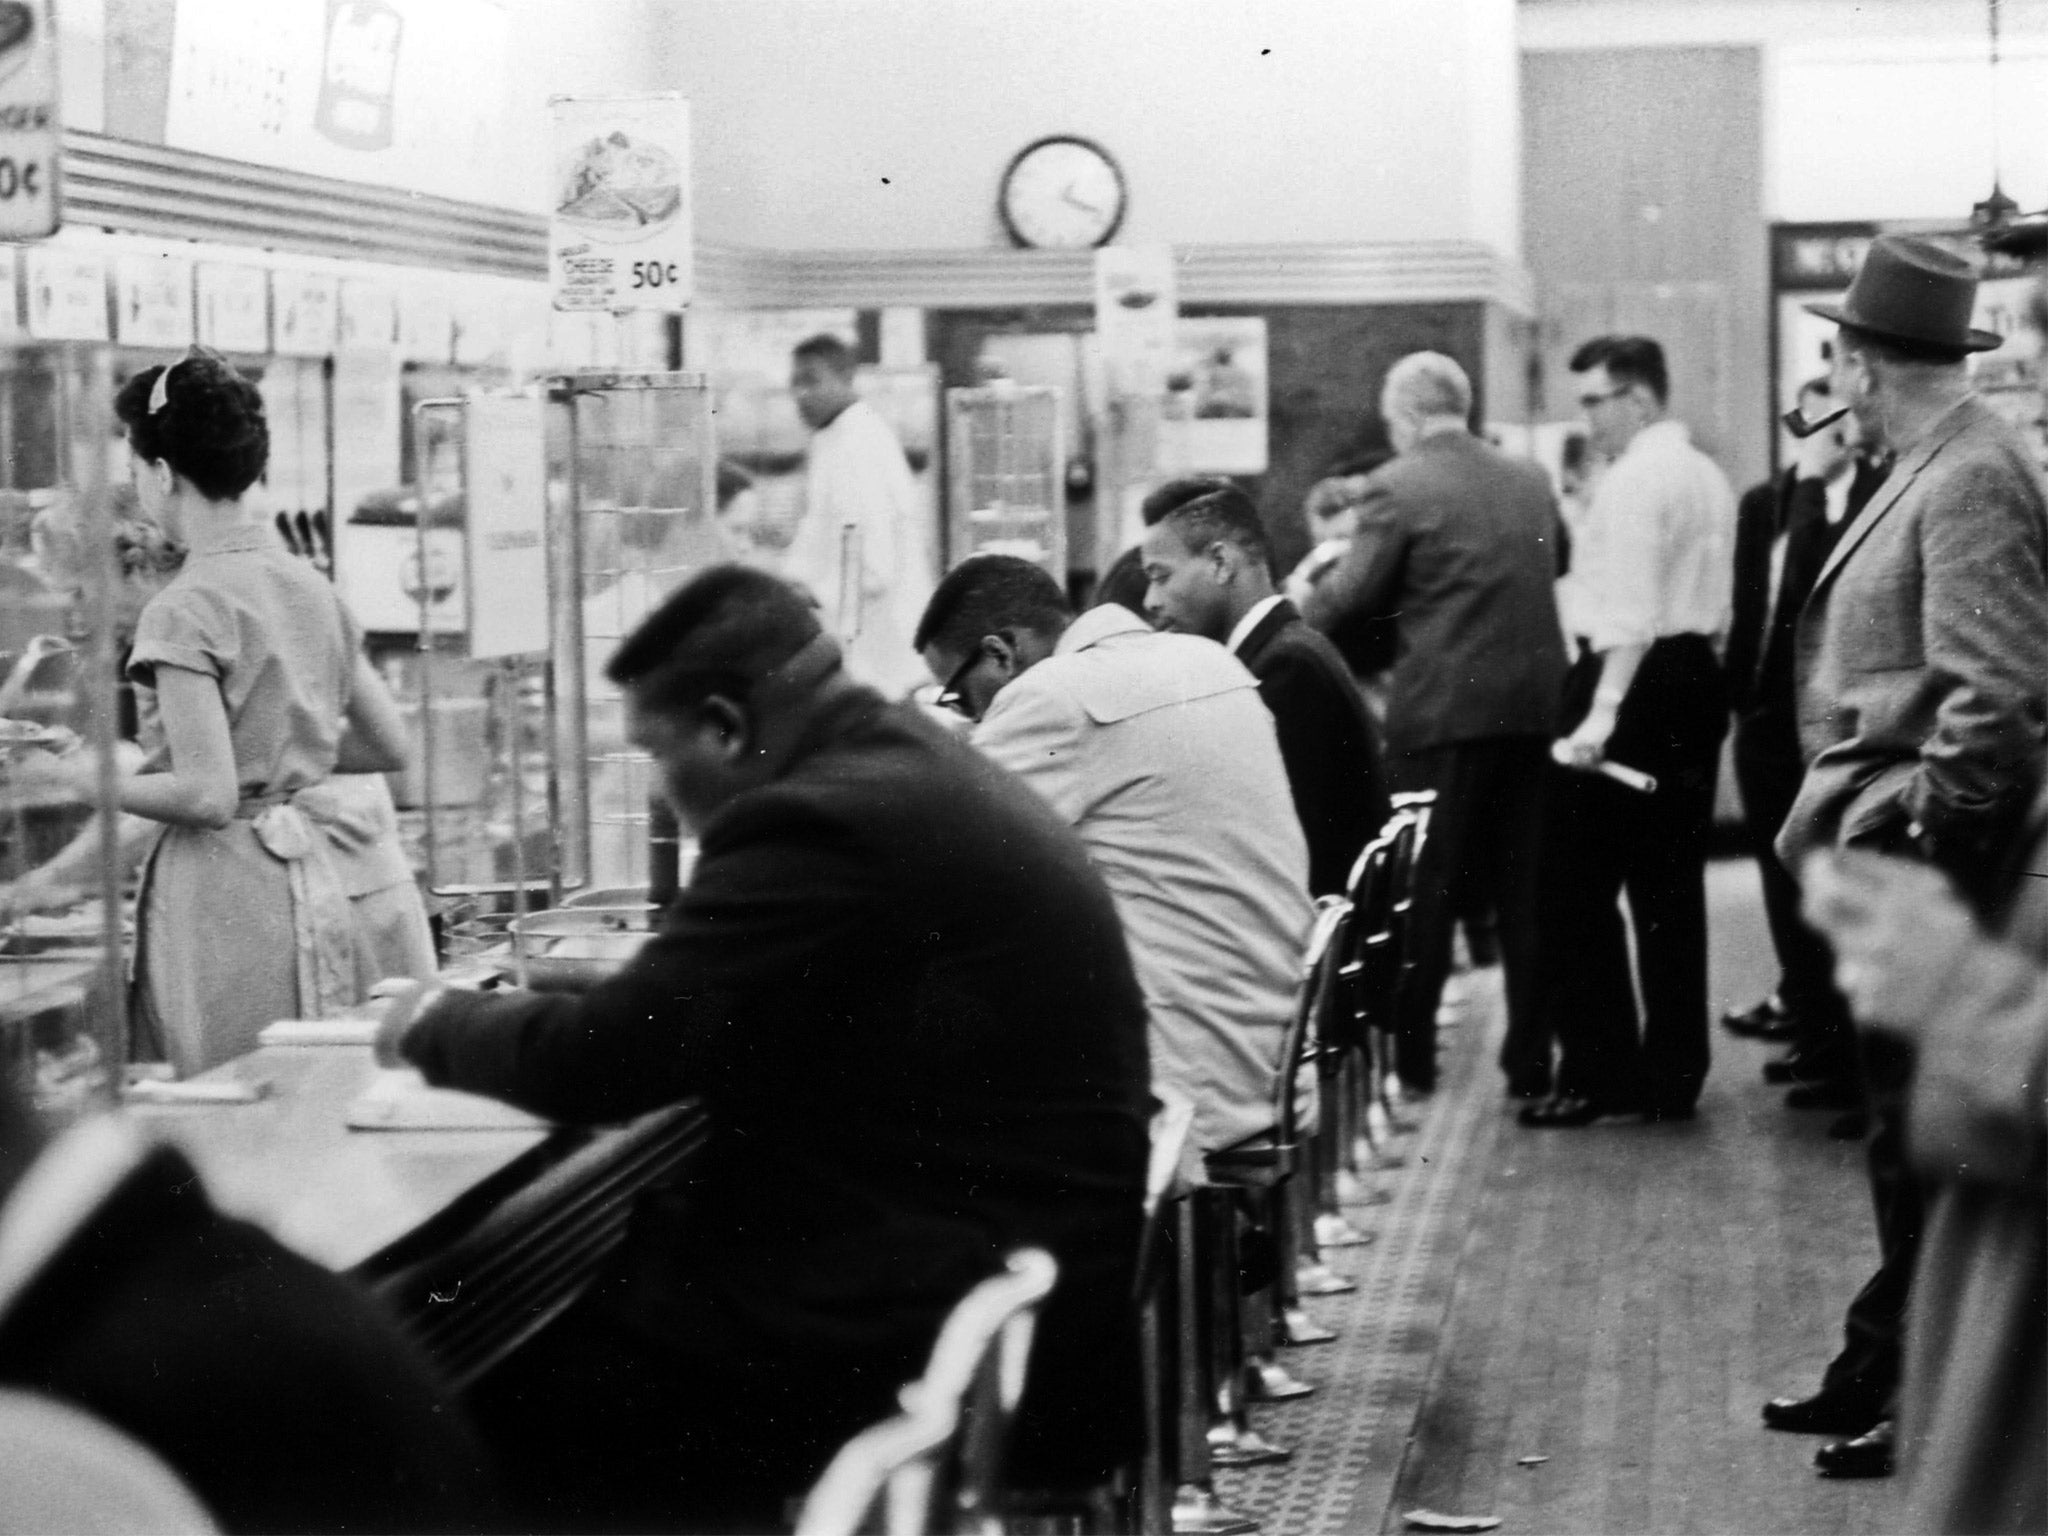 People take part in a civil rights 'sit-in' protest at the lunch counter at McCrory's in 1960. Eight Friendship Junior College students and a civil rights organizer were convicted of trespassing and breach of peace for staging a similar protest at the same lunch counter in 1961